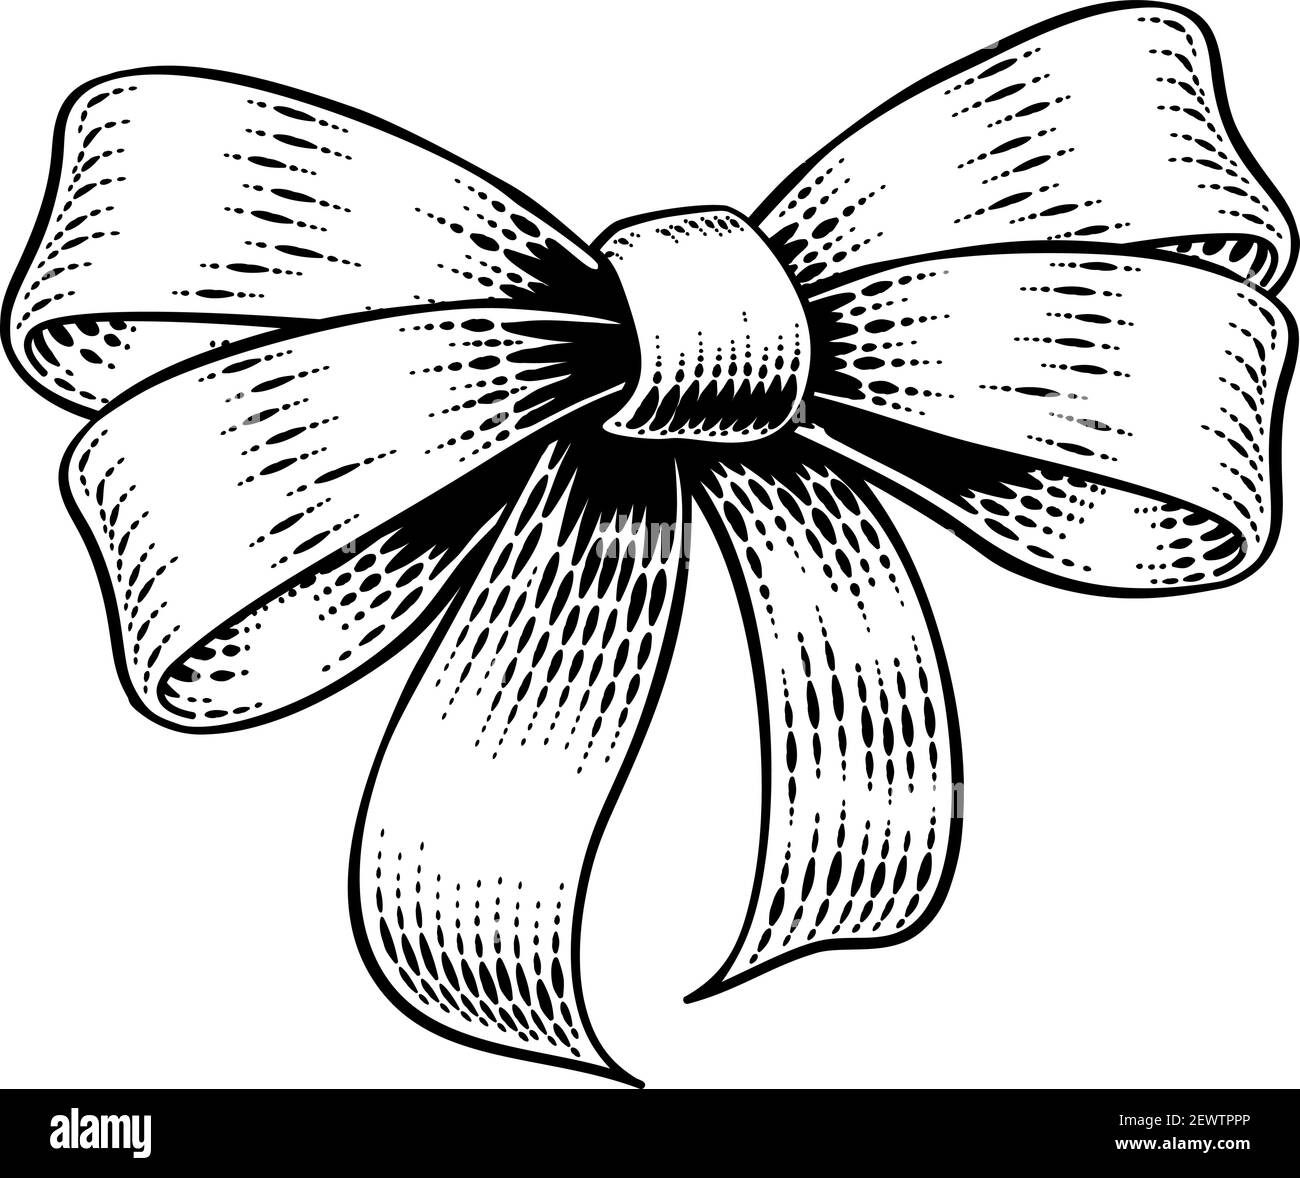 Bow Gift Ribbon vintage Woodcut Engraving Style Illustrazione Vettoriale